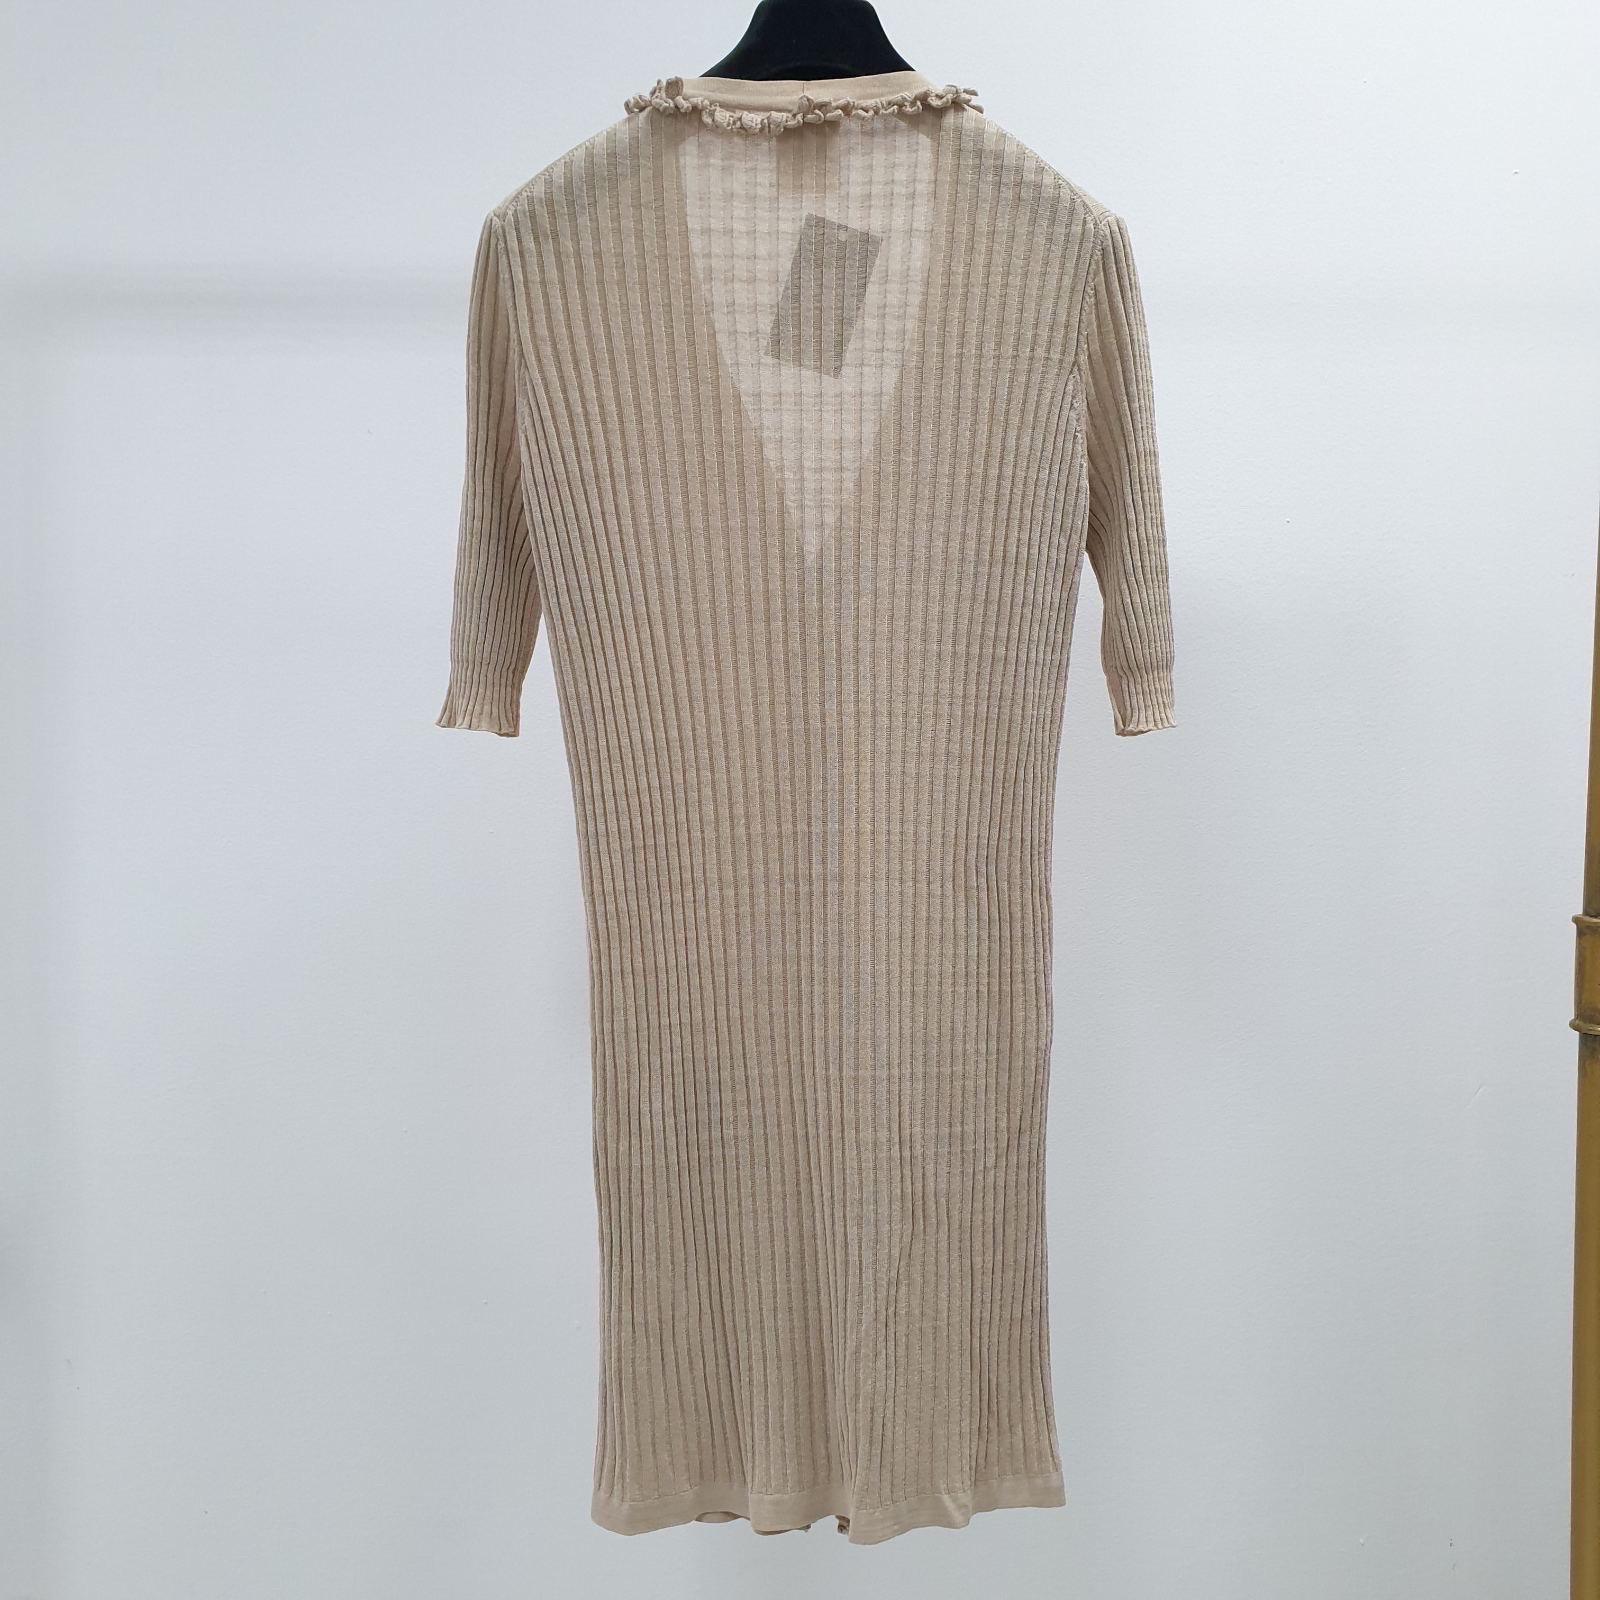 This Chanel cardigan dress is perfect if you want to wear something casual and still look classy. This beautiful ribbed dress is finished with ruffles and gold-toned buttons. It's the perfect addition to your spring closet! 

Material: 

    63%